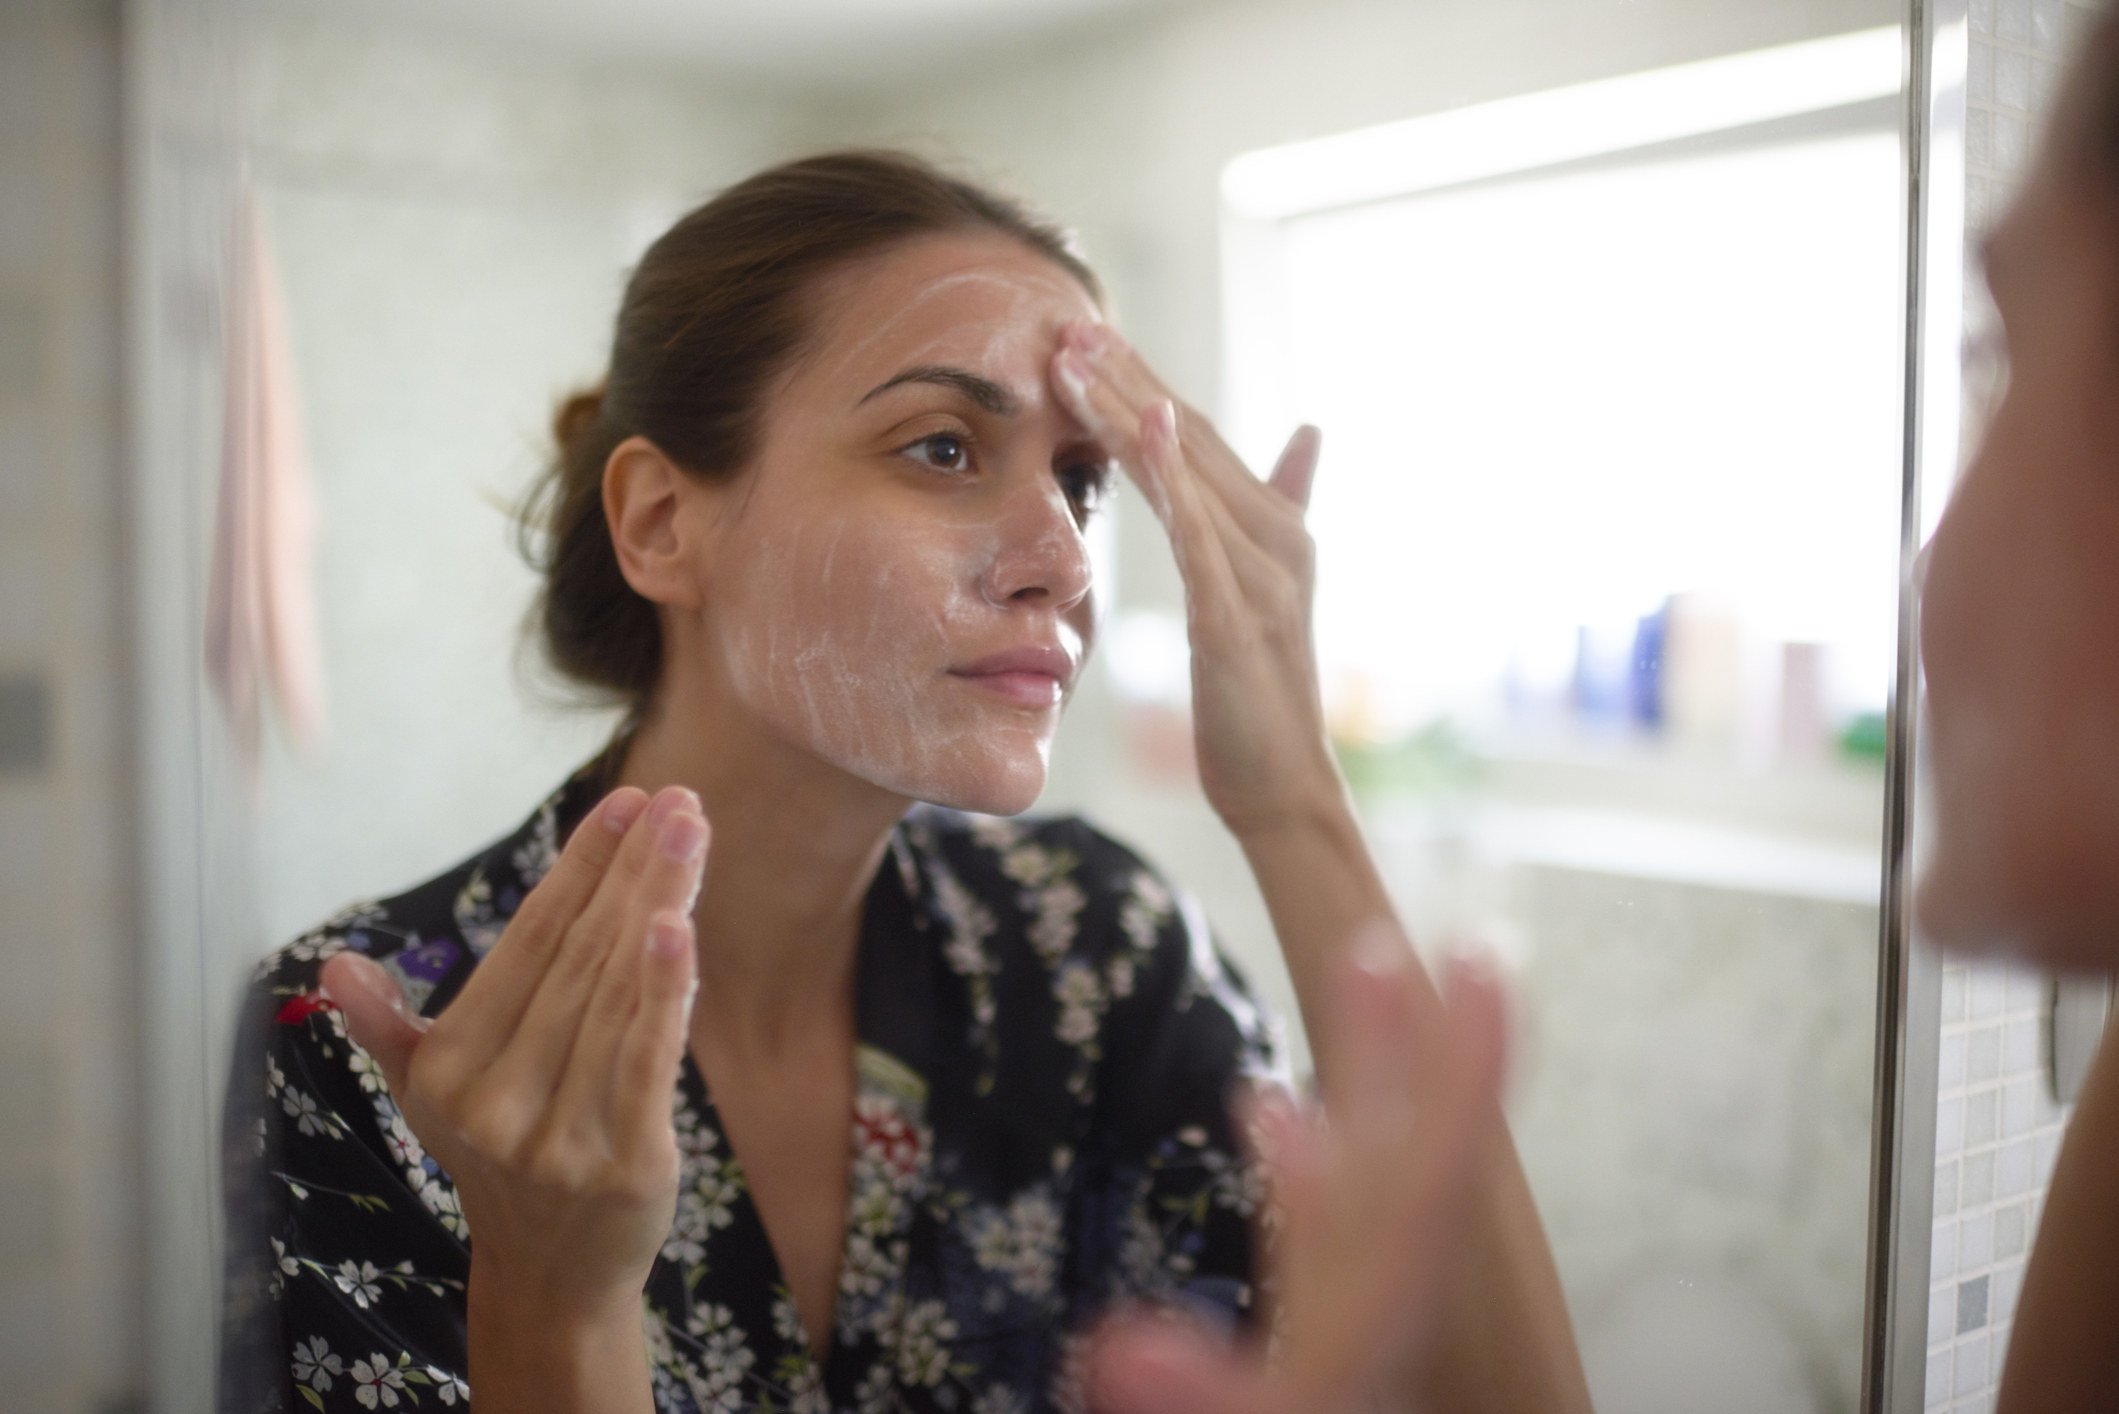 A woman washing her face and looking in the bathroom mirror